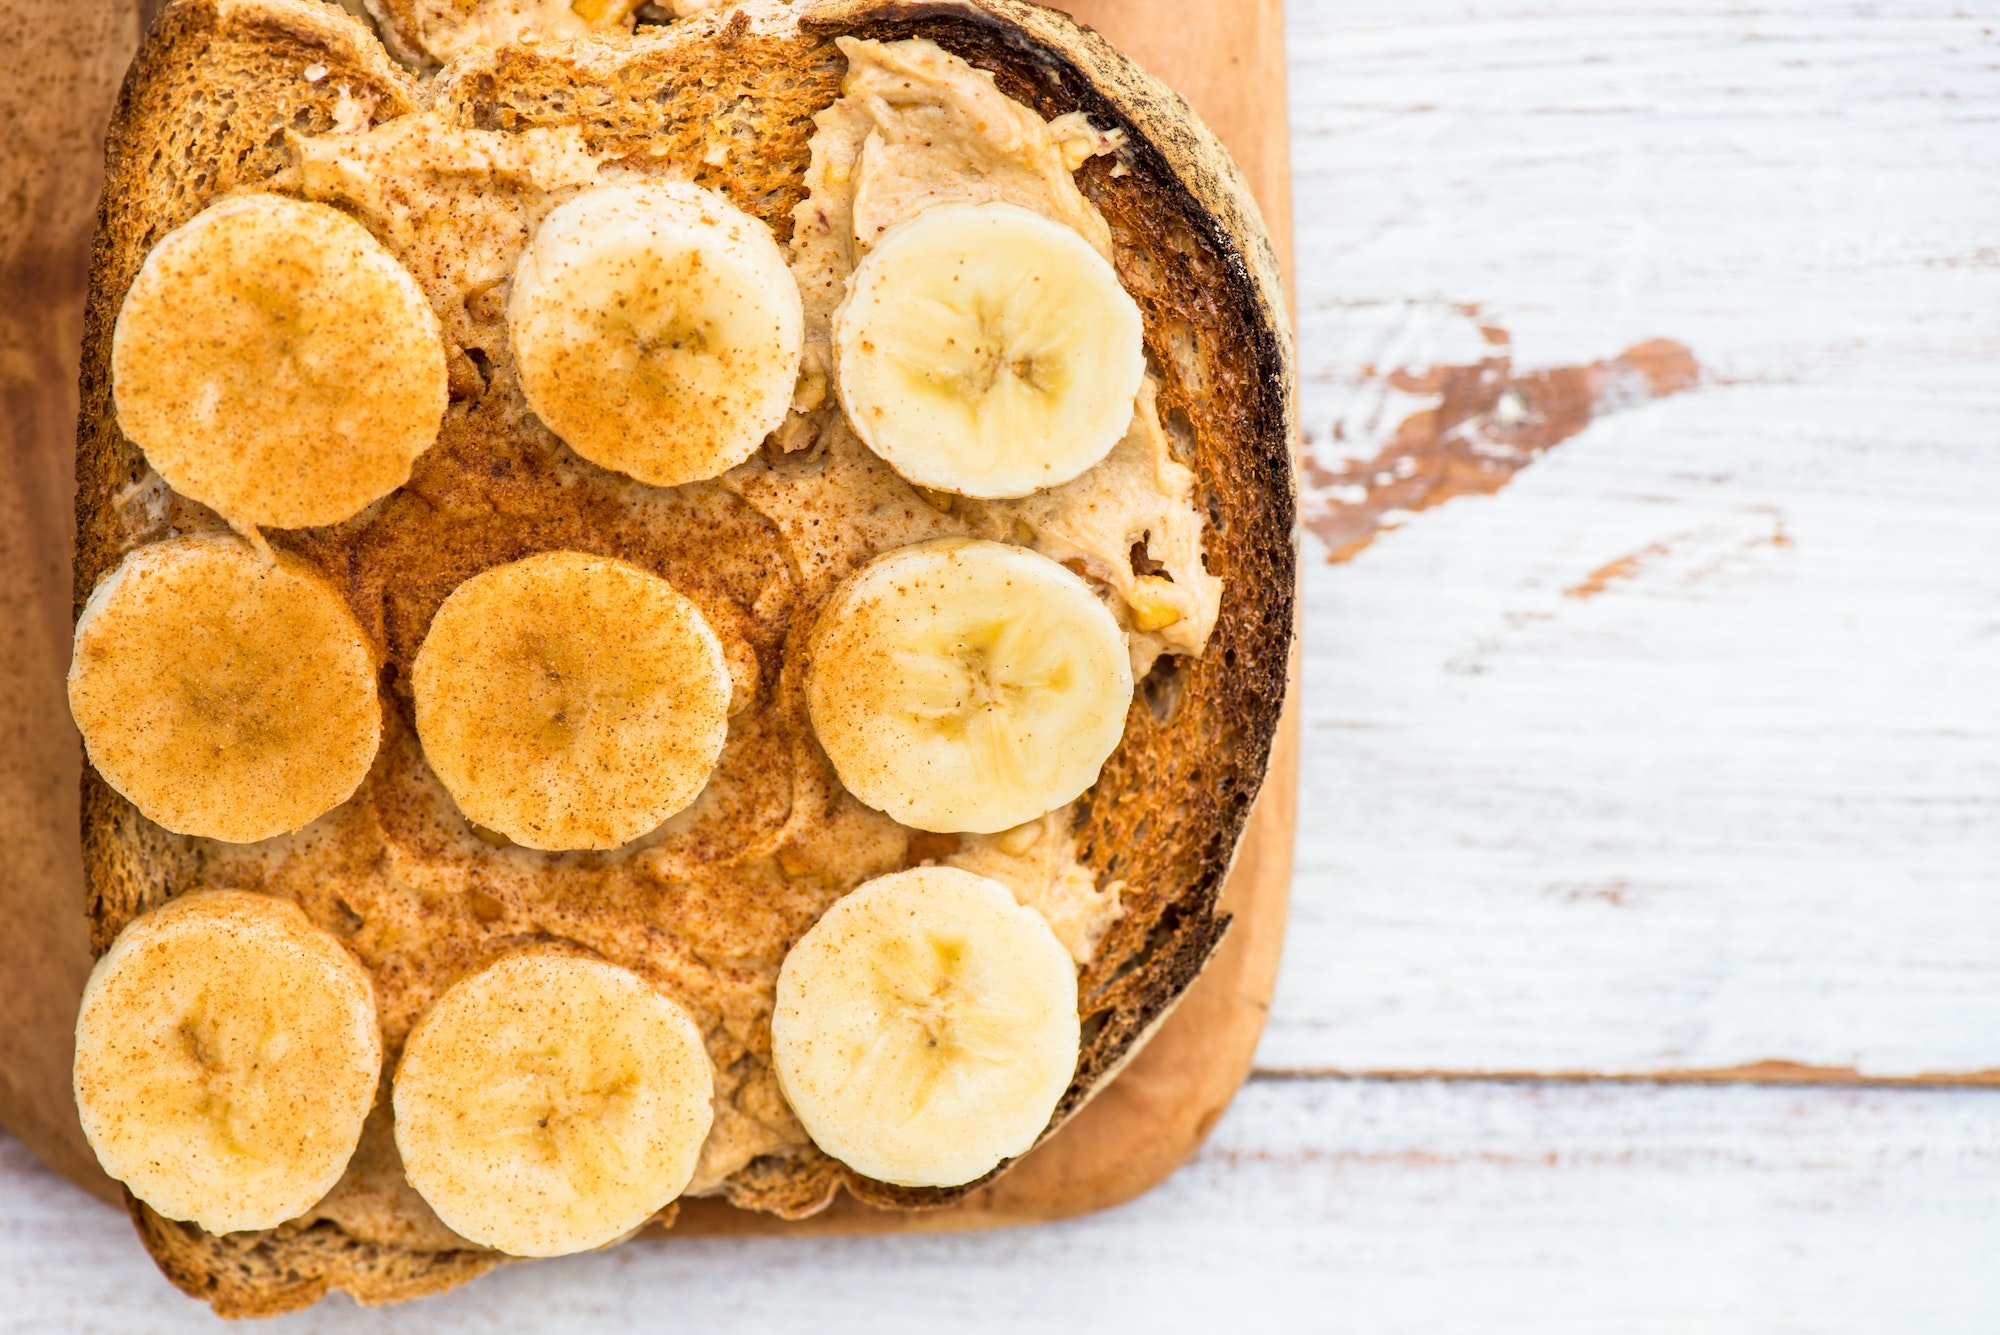 Toasts from Wholewheat Bread with Peanut Butter and Banana